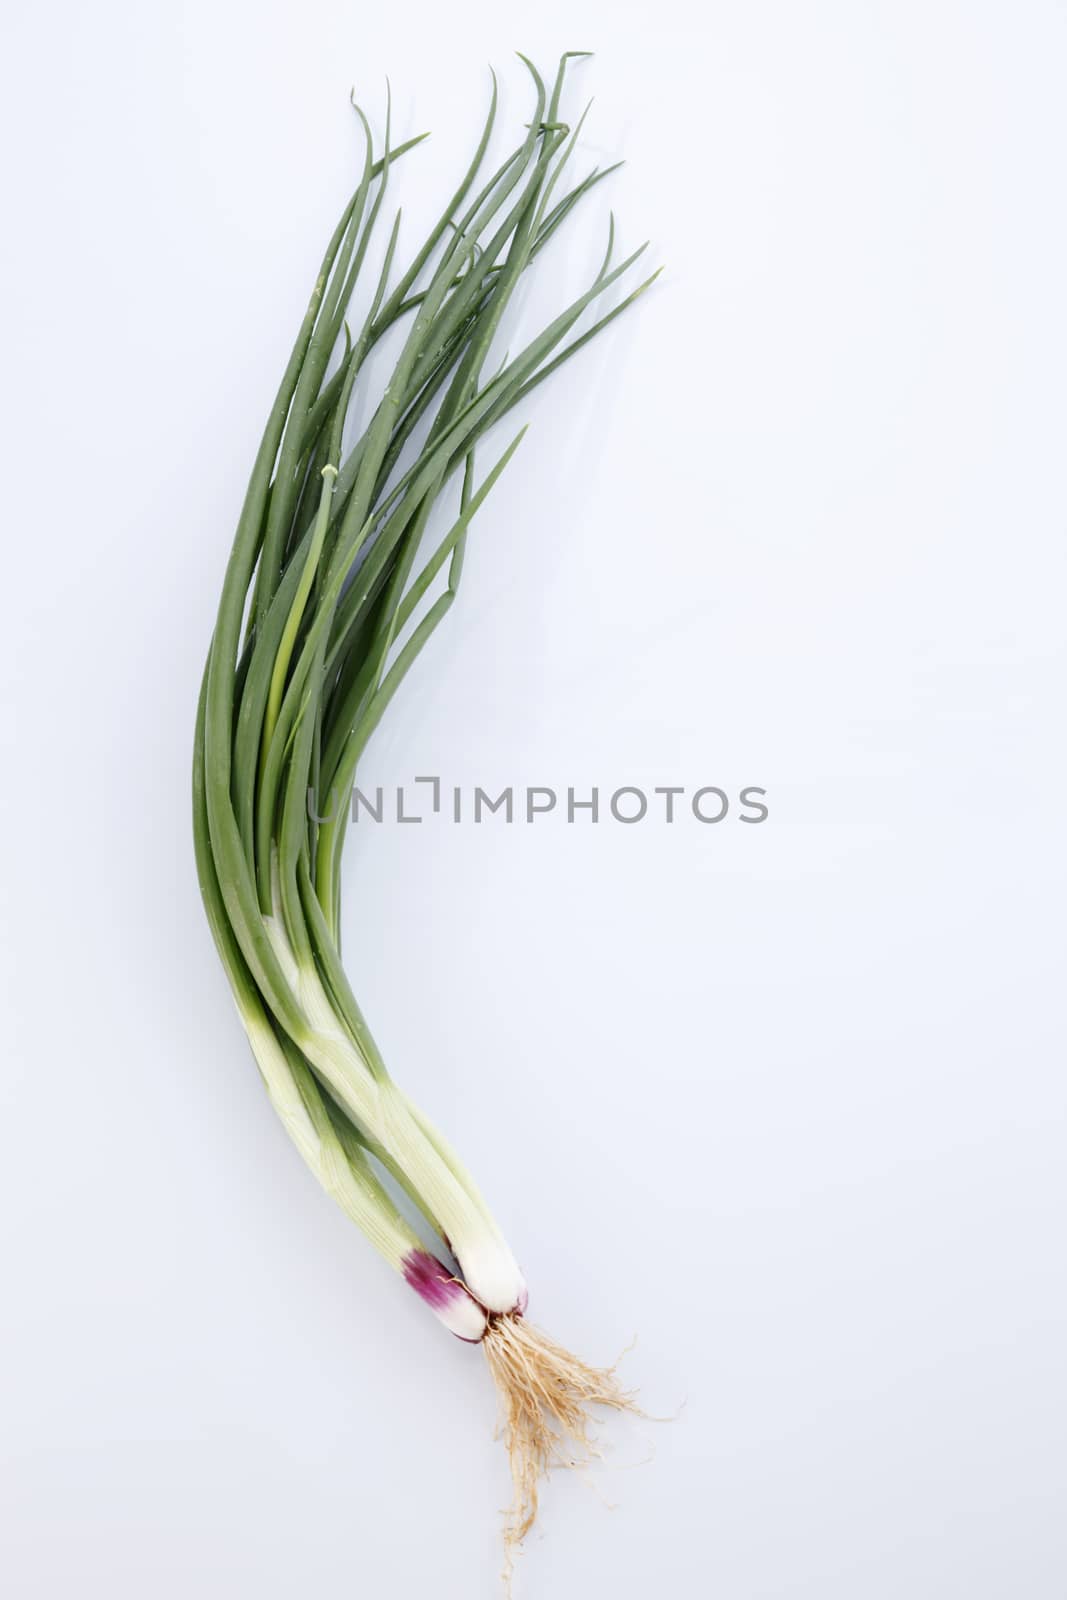 Spring Onions on White Background